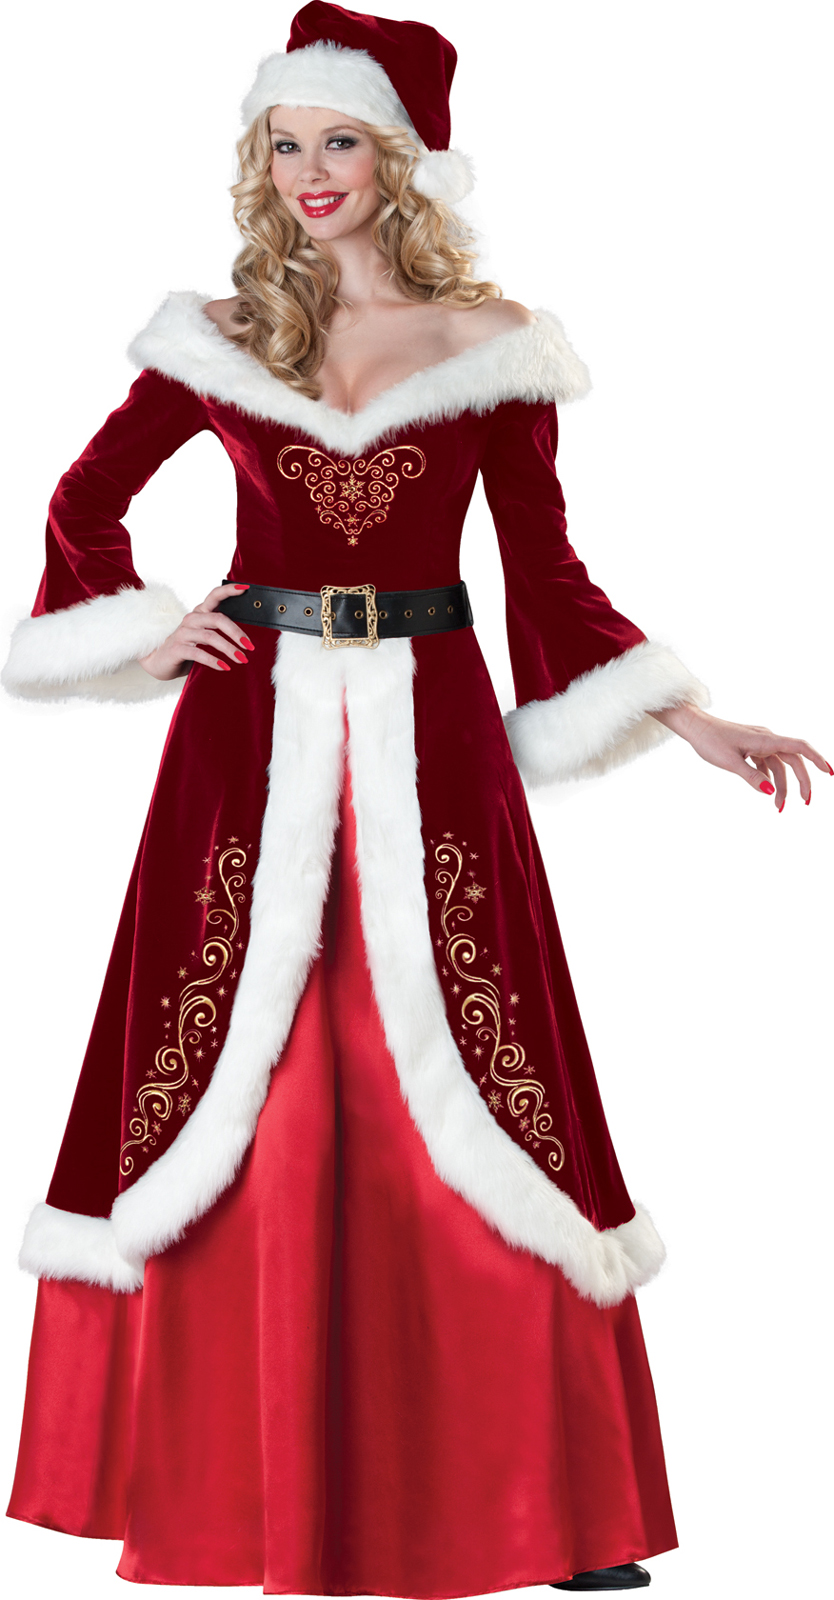 In Character Costumes Women's Mrs. St. Nick Adult Costume - Red - Large